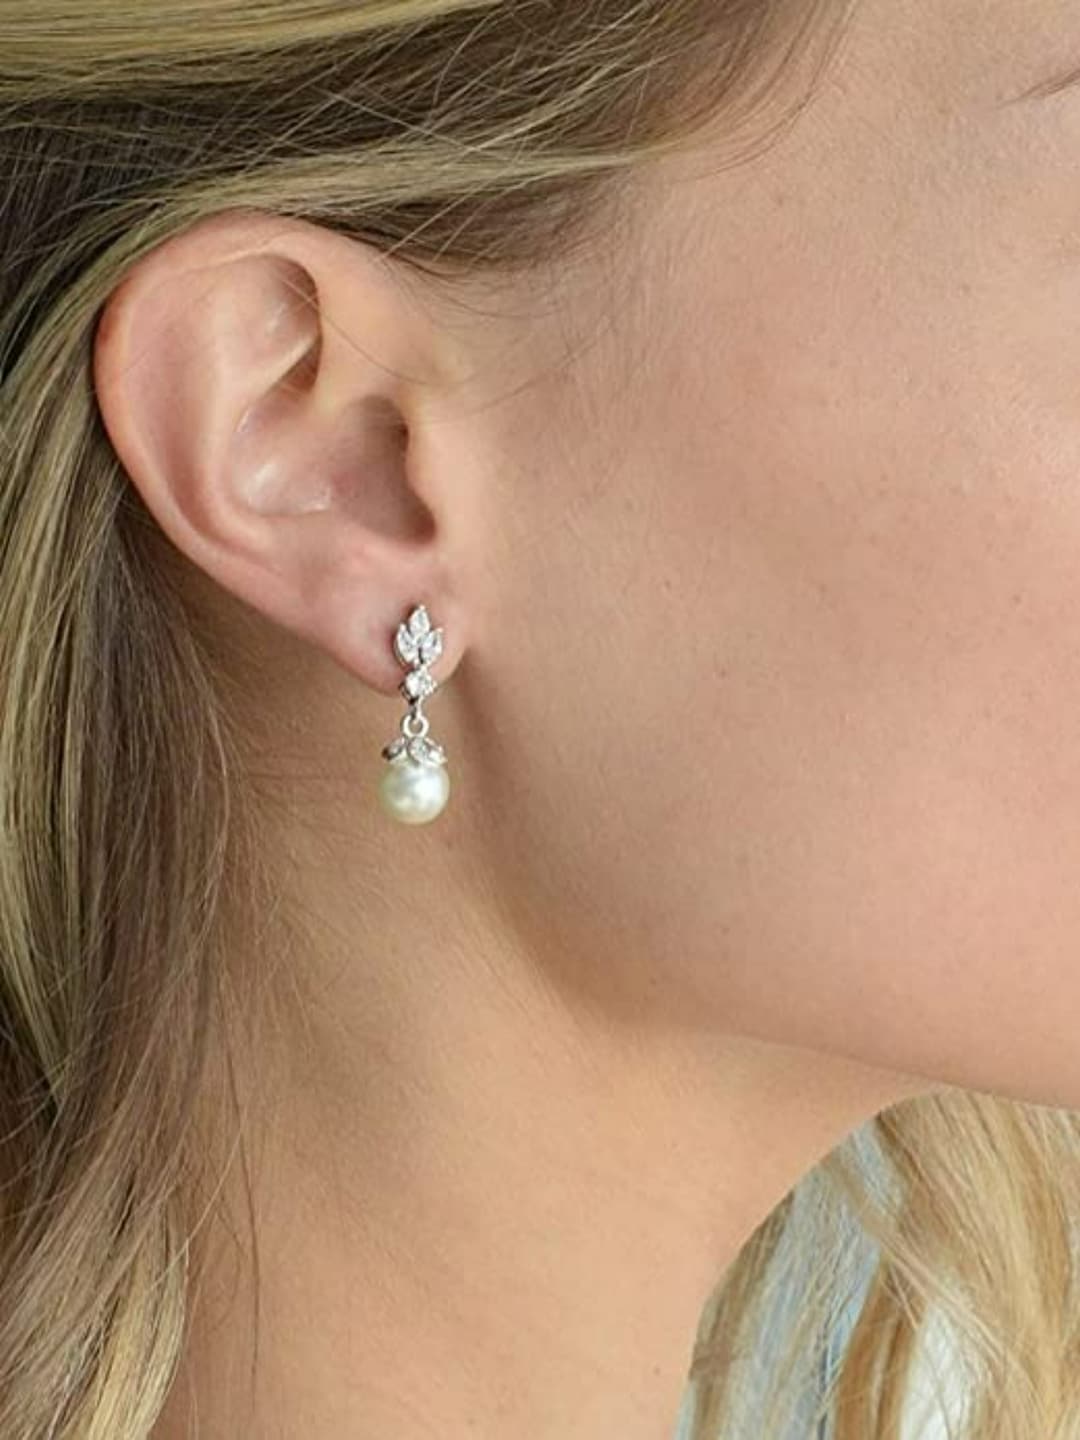 EL REGALO Silver-Toned Circular Drop Earrings - for Women and Girls
Style ID: 16991452